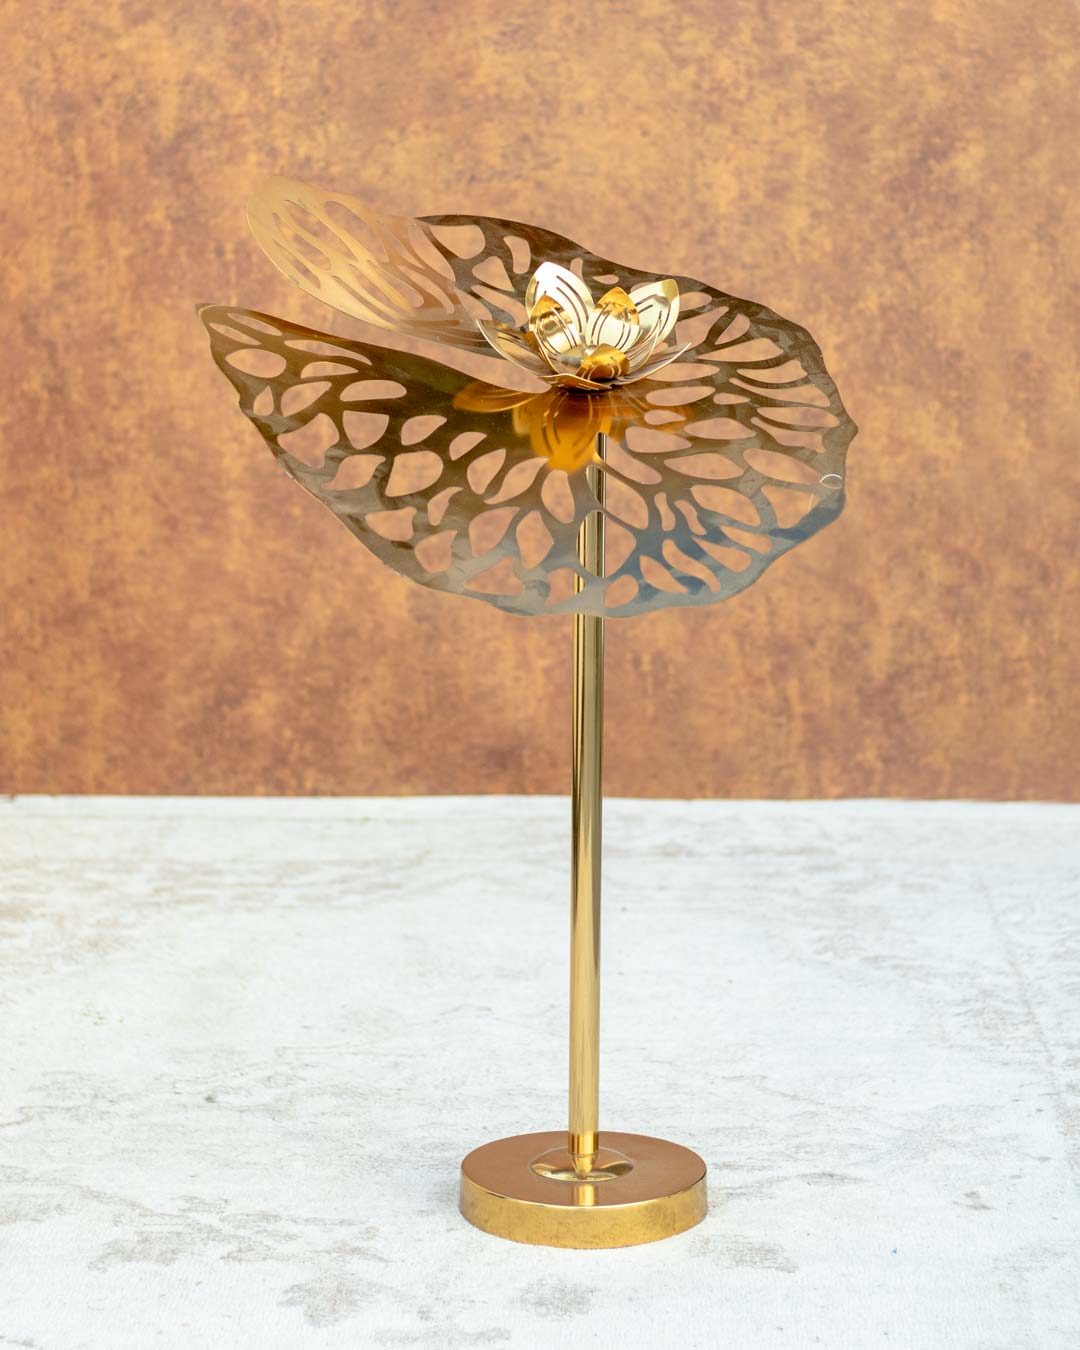 Shattered Autumn Leaf Decorative Table Top - Small